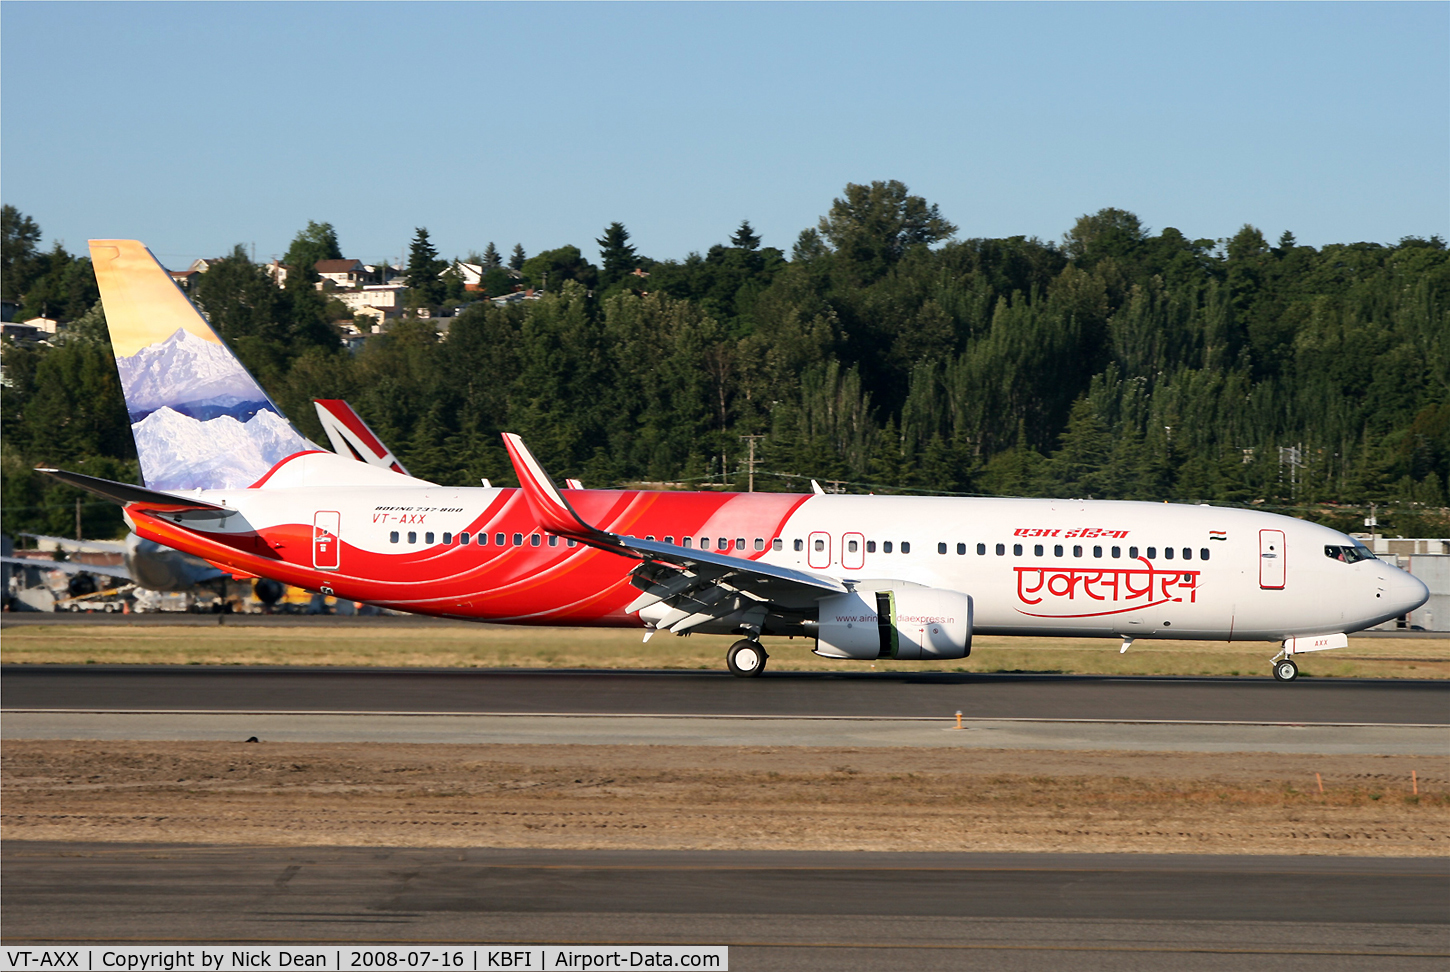 VT-AXX, 2008 Boeing 737-8HG C/N 36336/2672, Different scheme on each side of the vertical